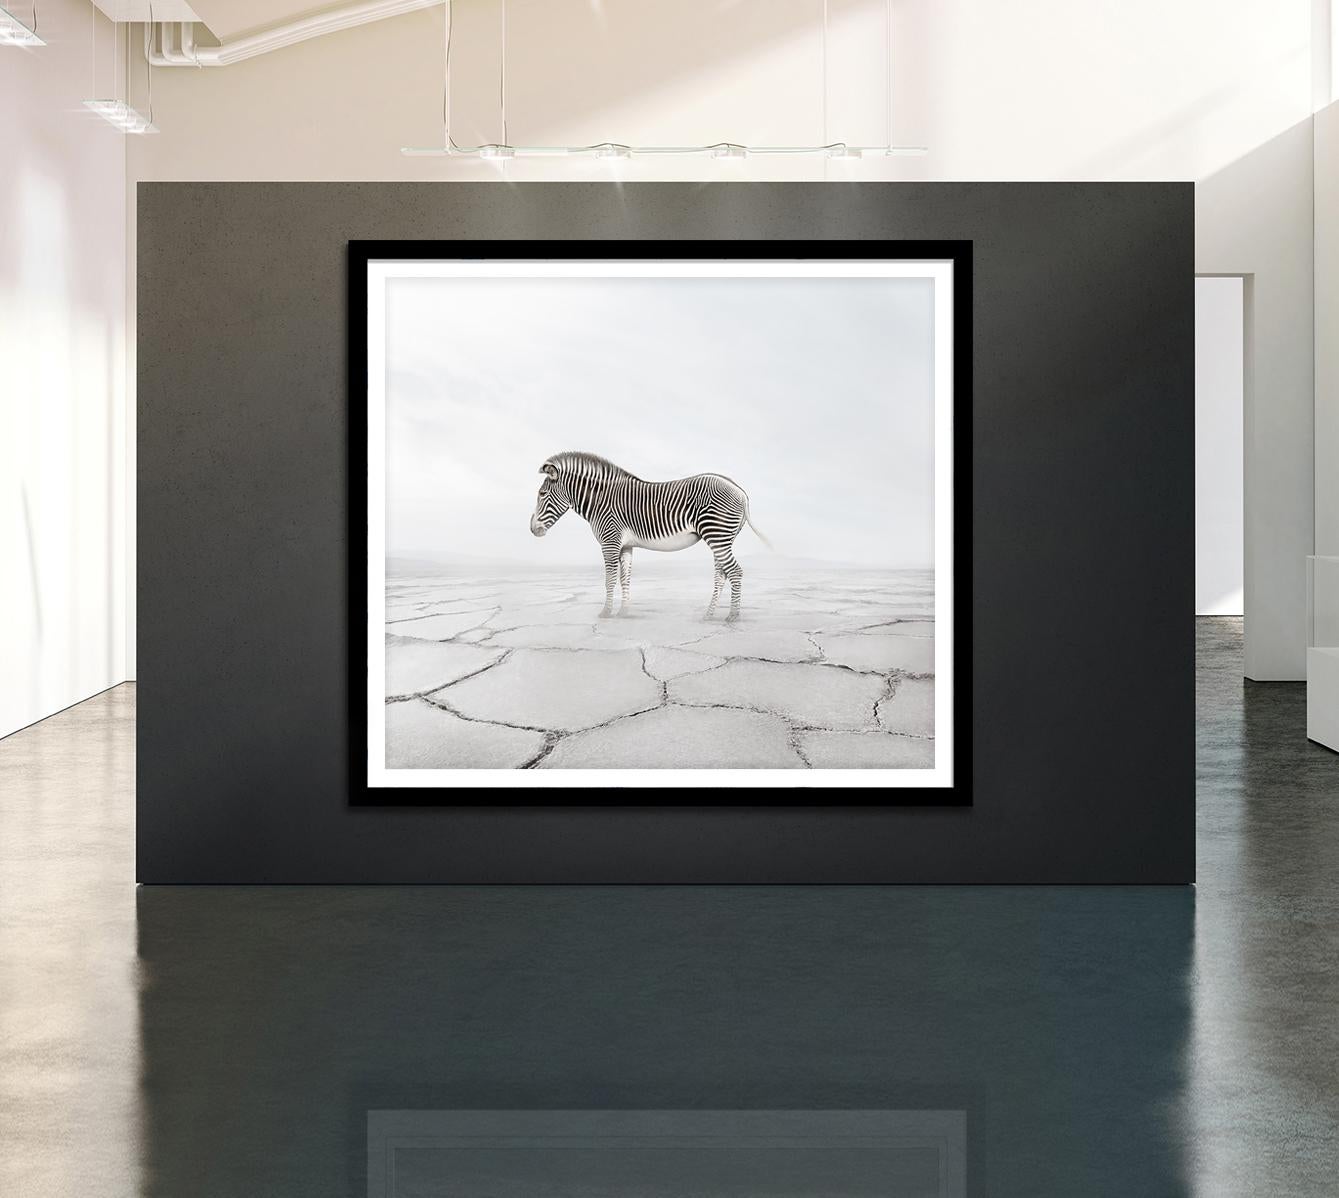 In this series, Zilberberg creates animal montages as an expression of self-therapy. As a person living in the west, moving through a daily life that is sometimes high-paced and emotionally complex, the artist finds calm in the presence of these